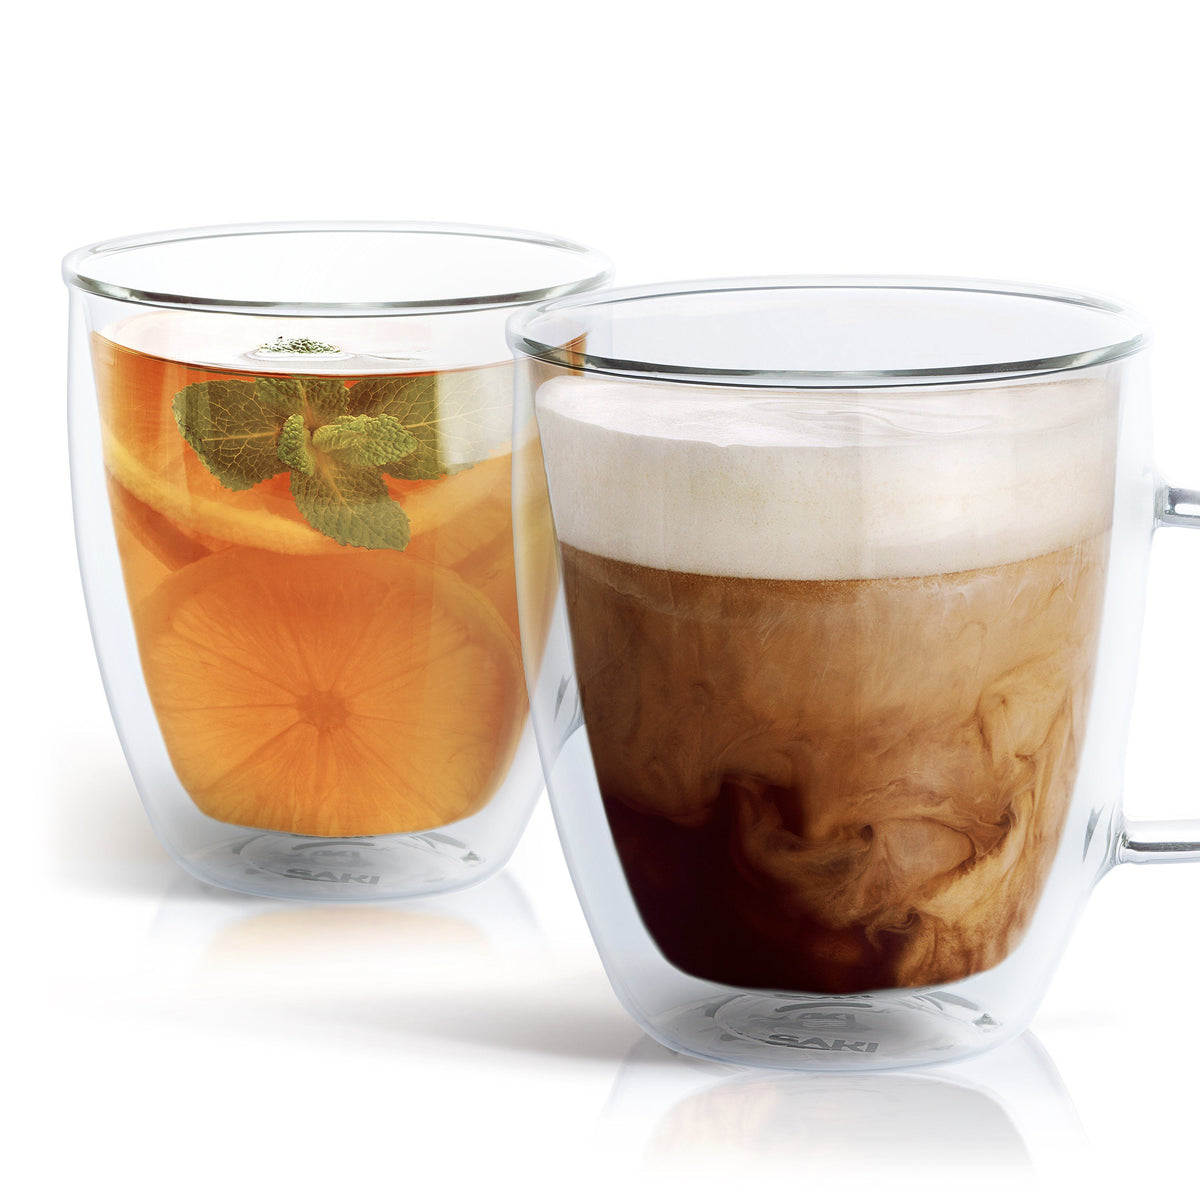 Cappuccino Cups Set of 2 Double Walled Coffee Glasses Lunae 